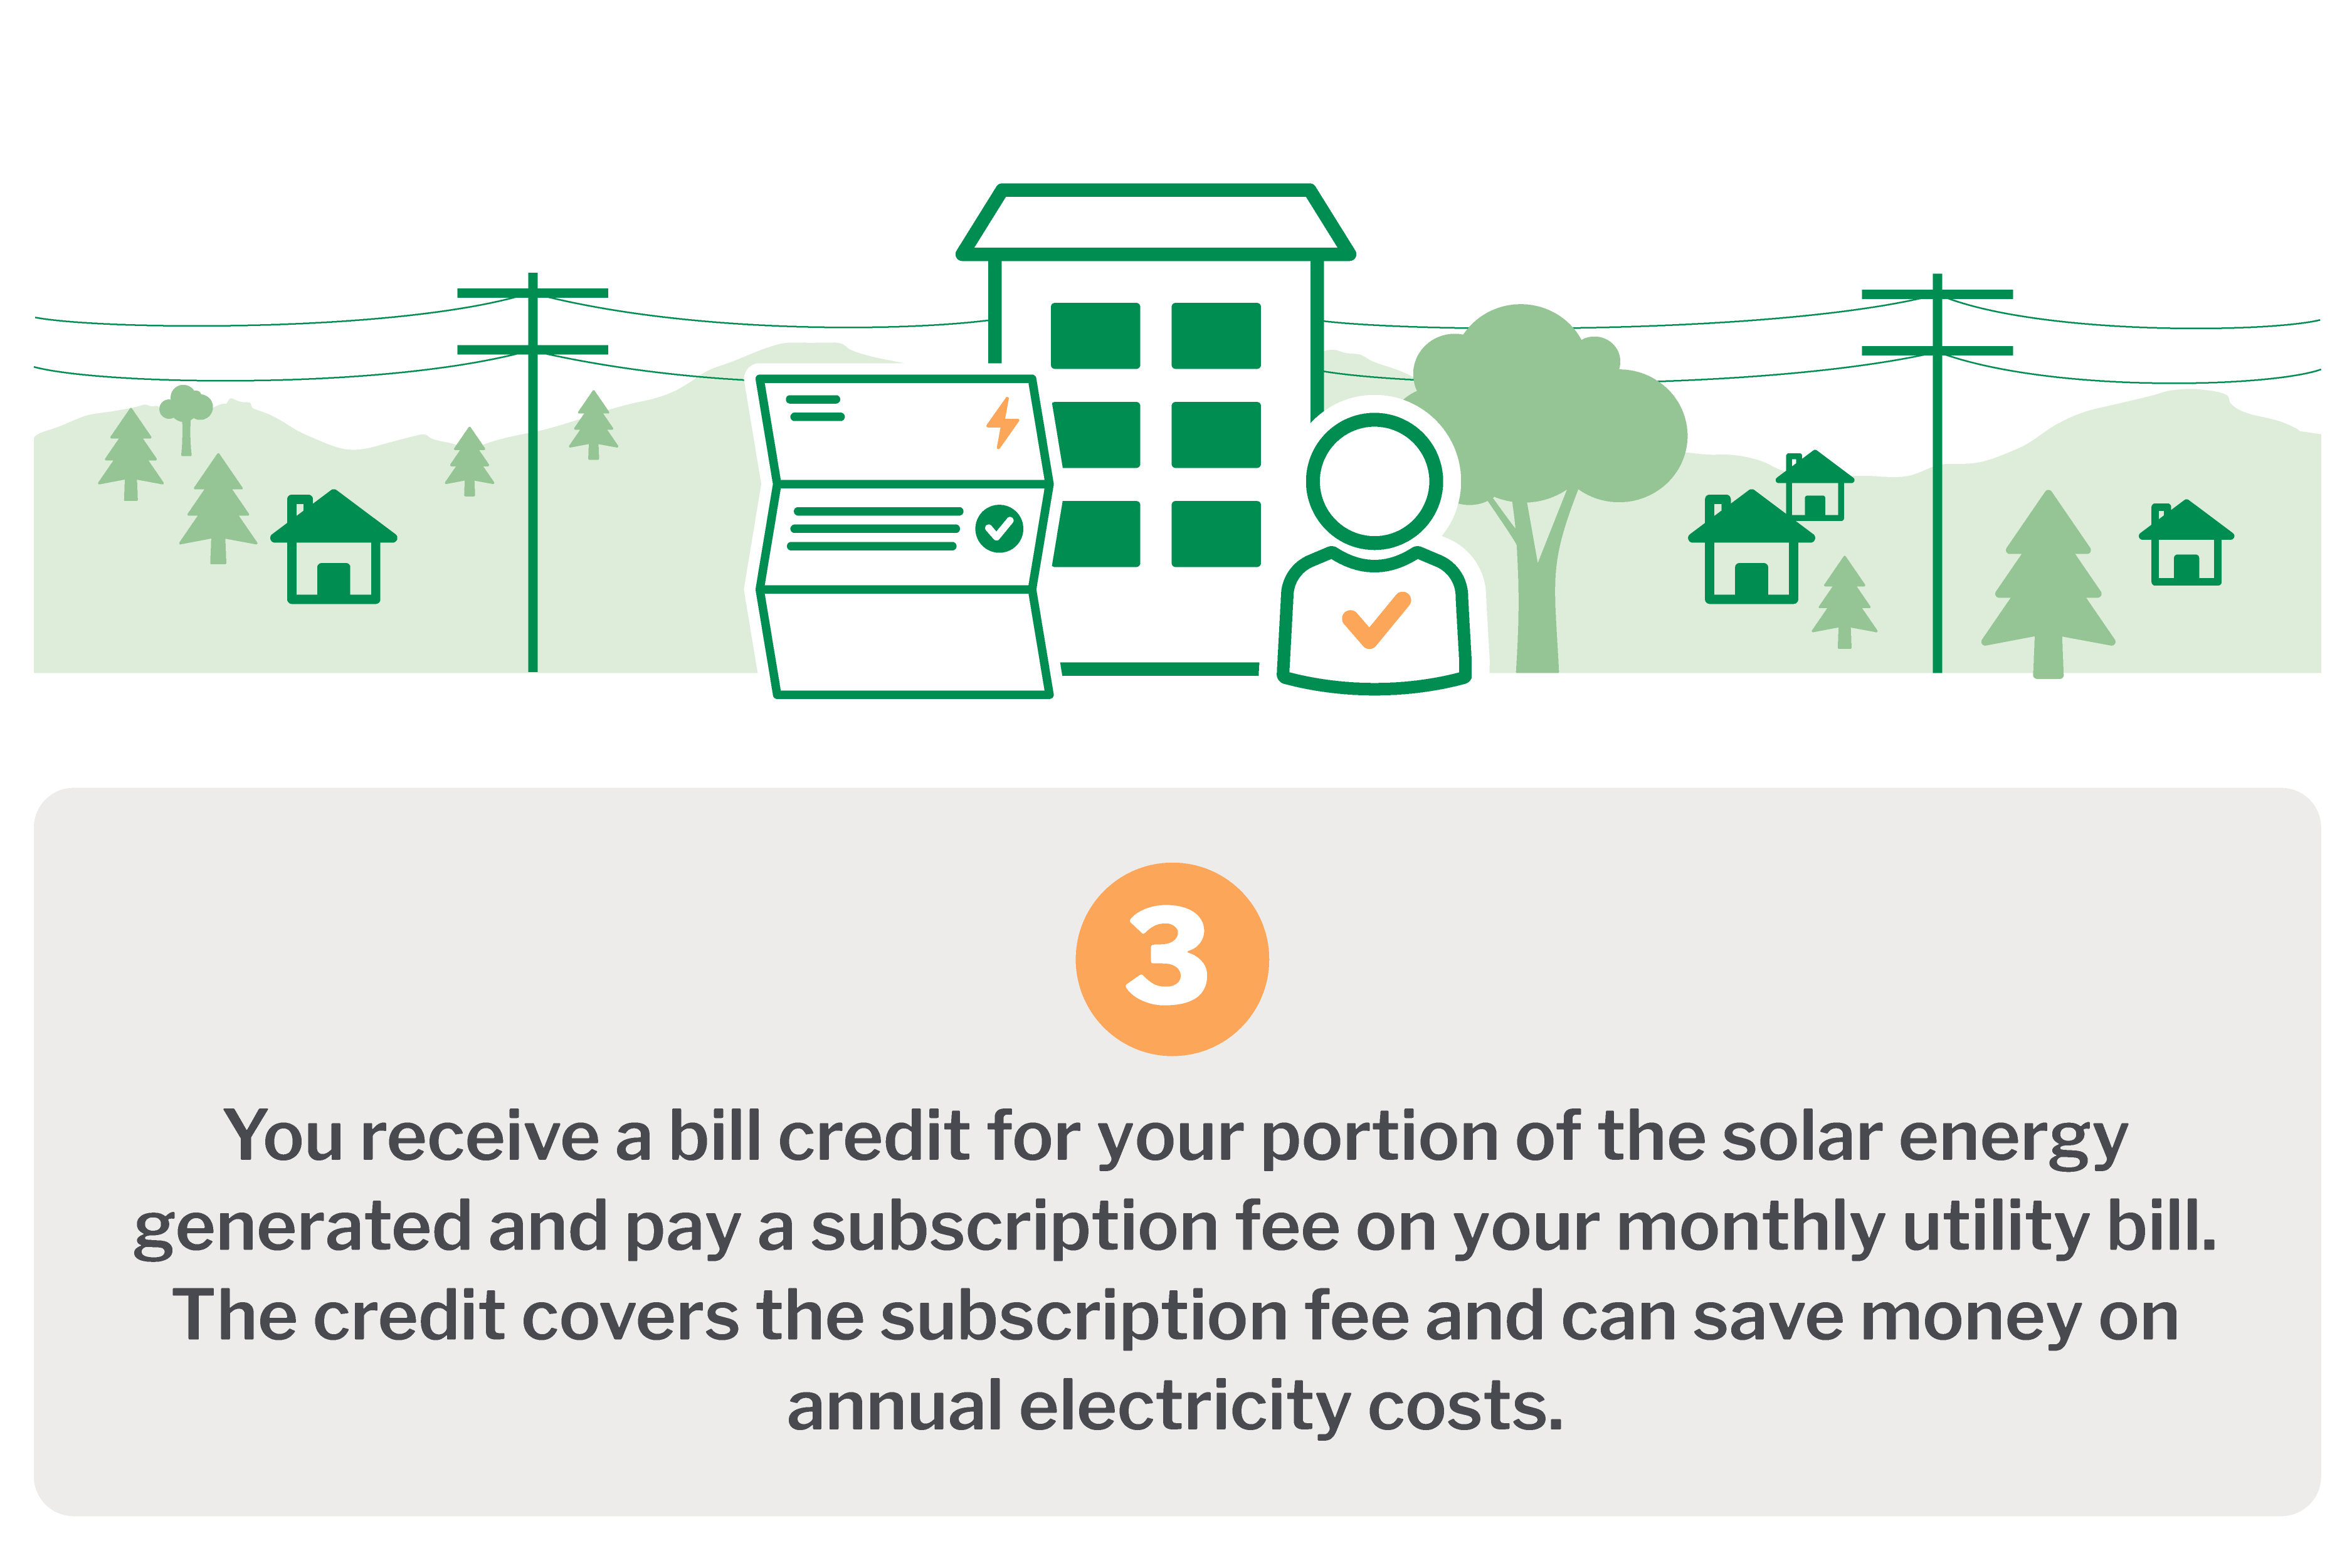 You receive a bill credit for your portion of the solar energy generated and pay a subscription fee on your monthly utility bill. The credit covers the subscription fee and can save money on annual electricity costs.